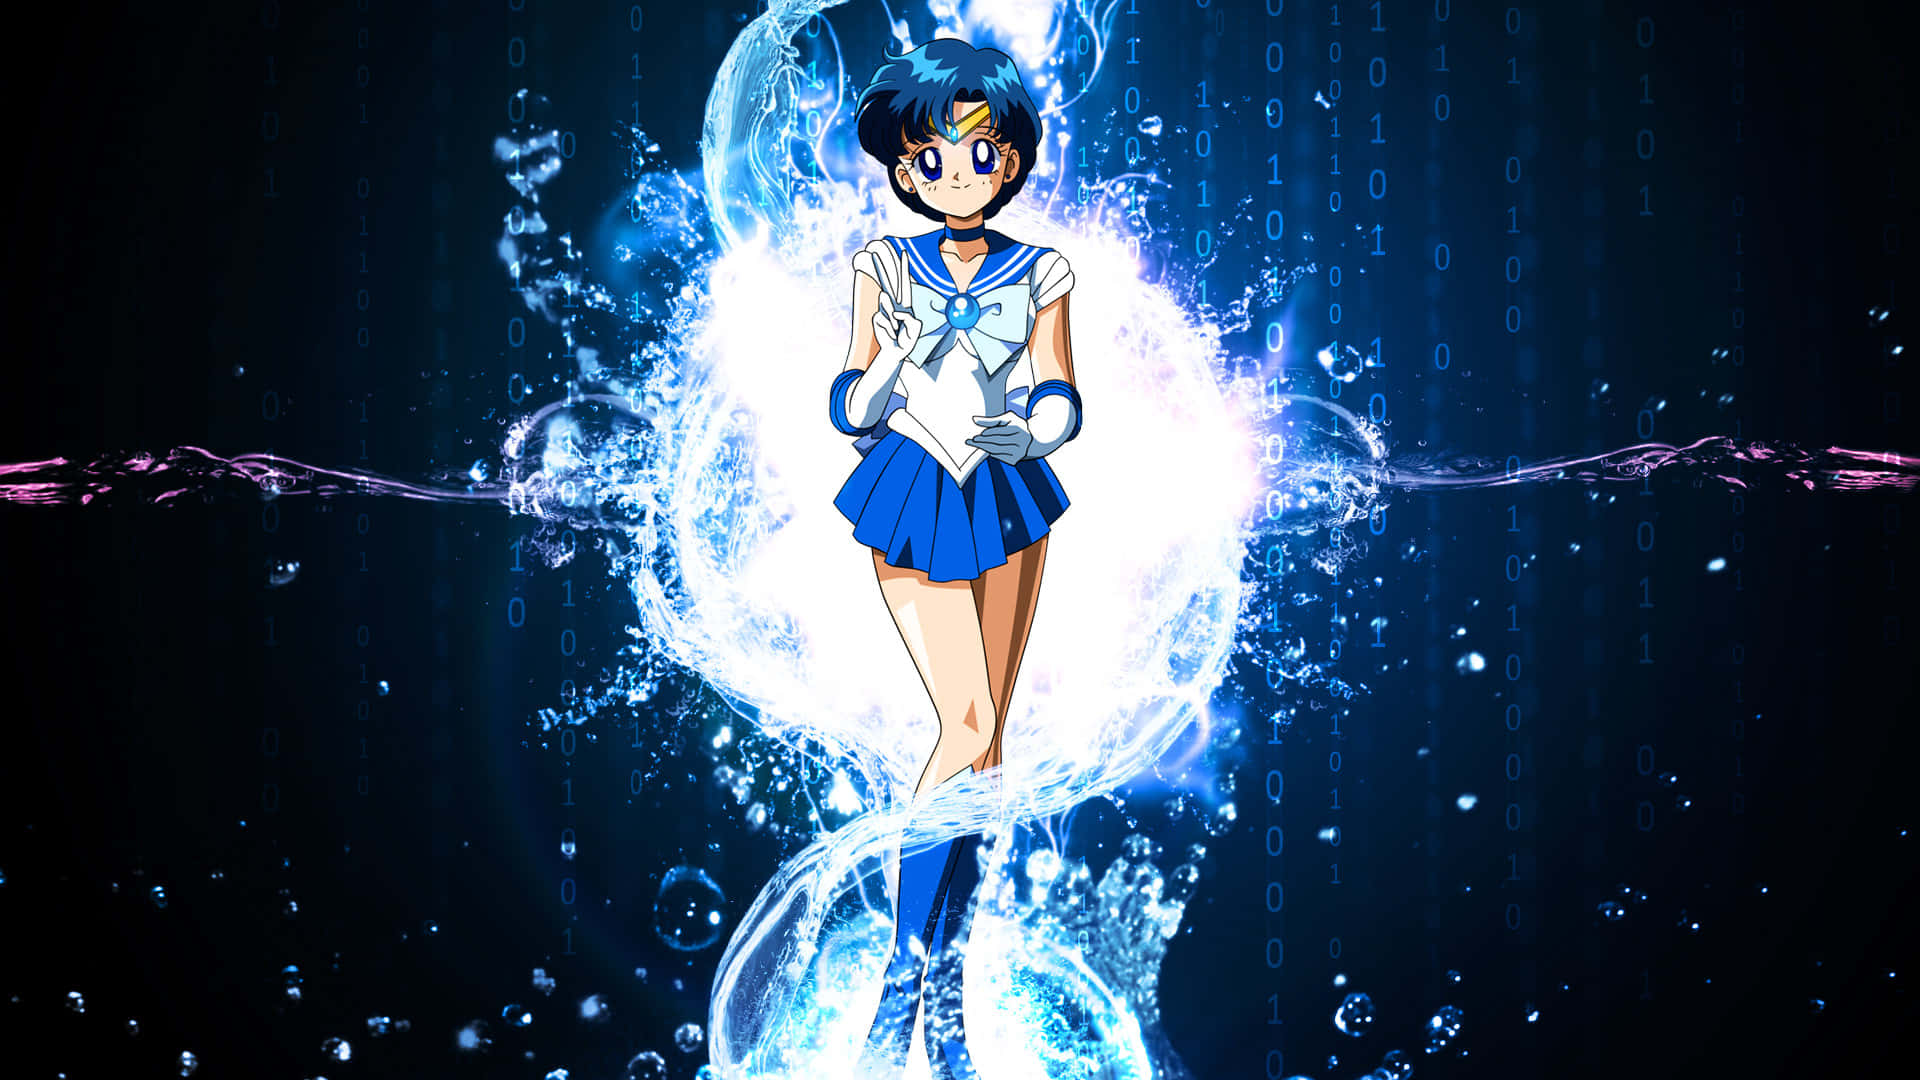 Sailor Mercury - Guardian Of Water, Friend Of The Planet